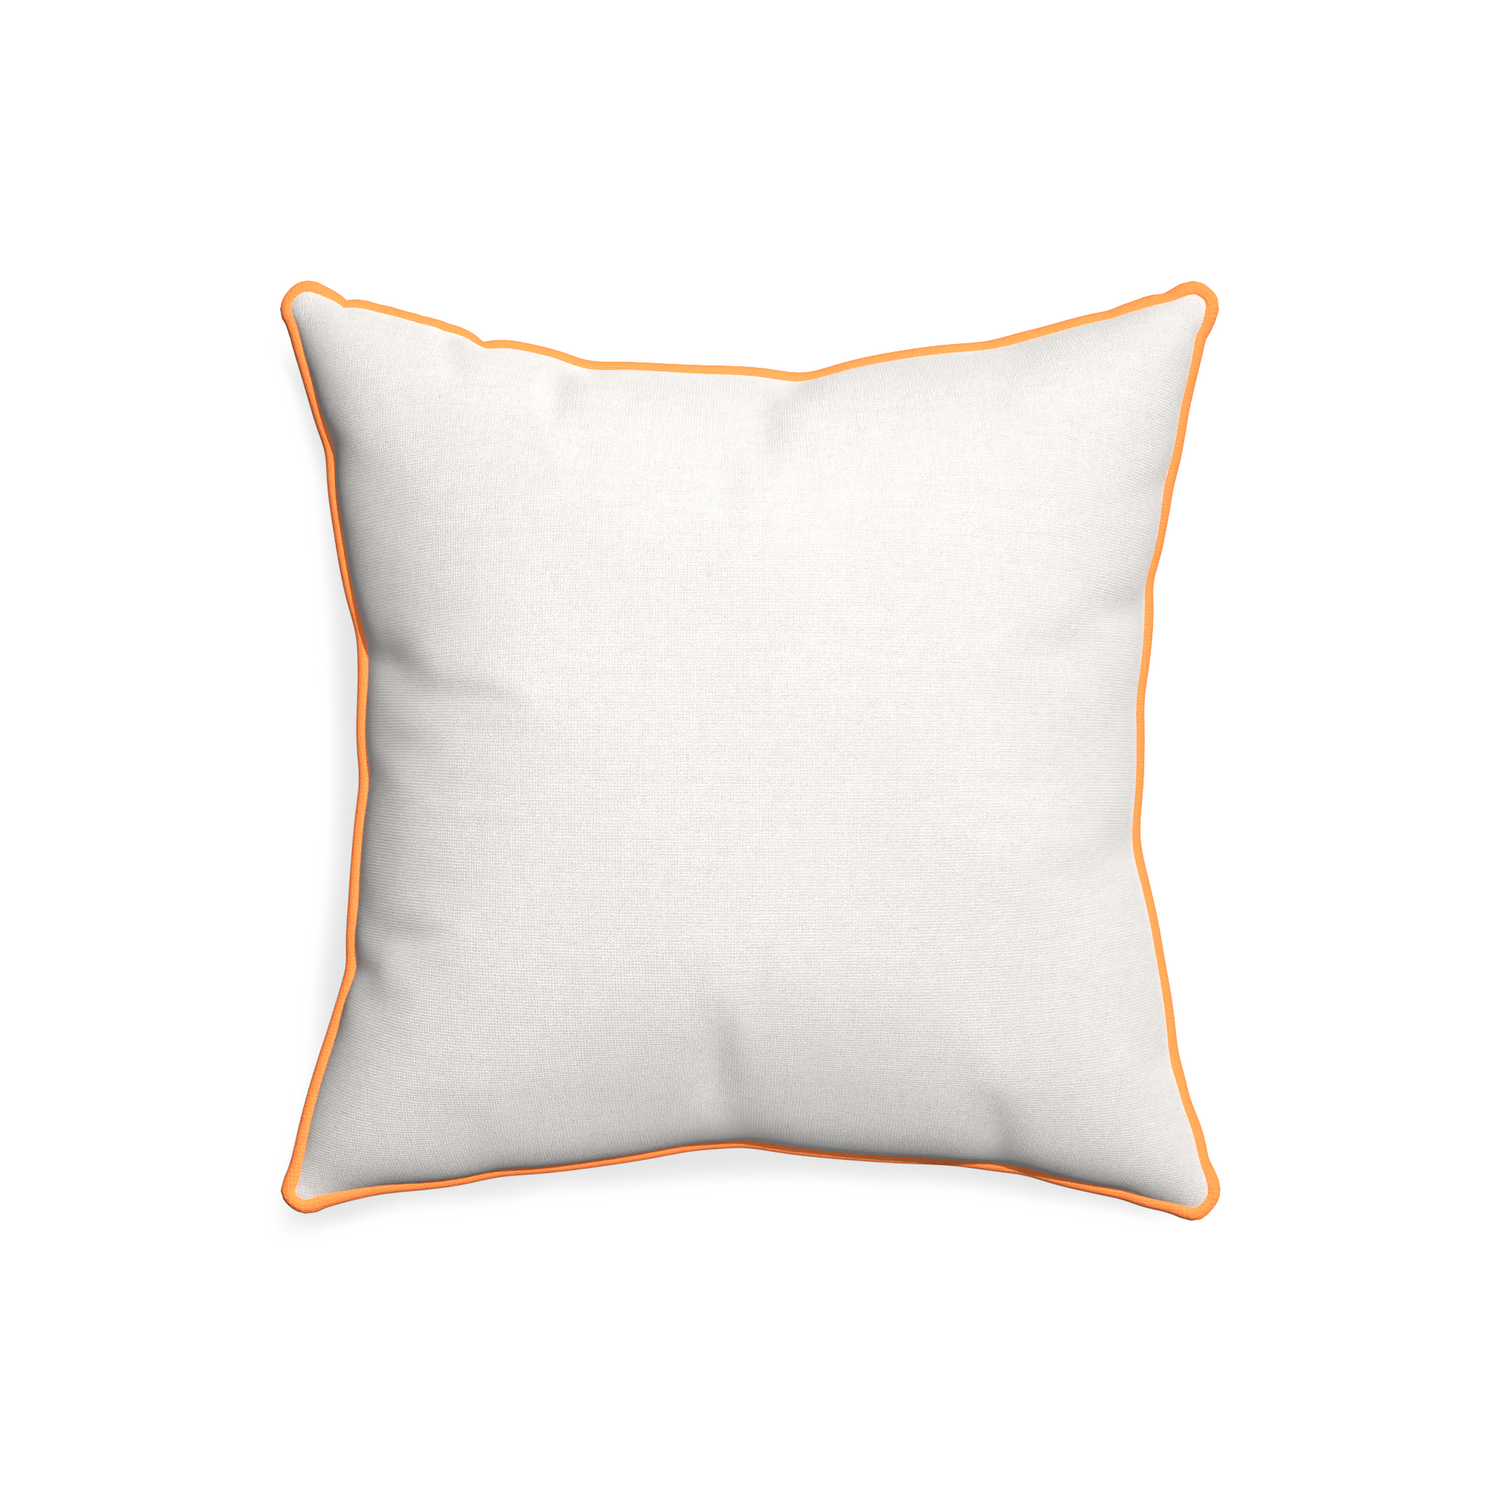 20-square flour custom pillow with clementine piping on white background